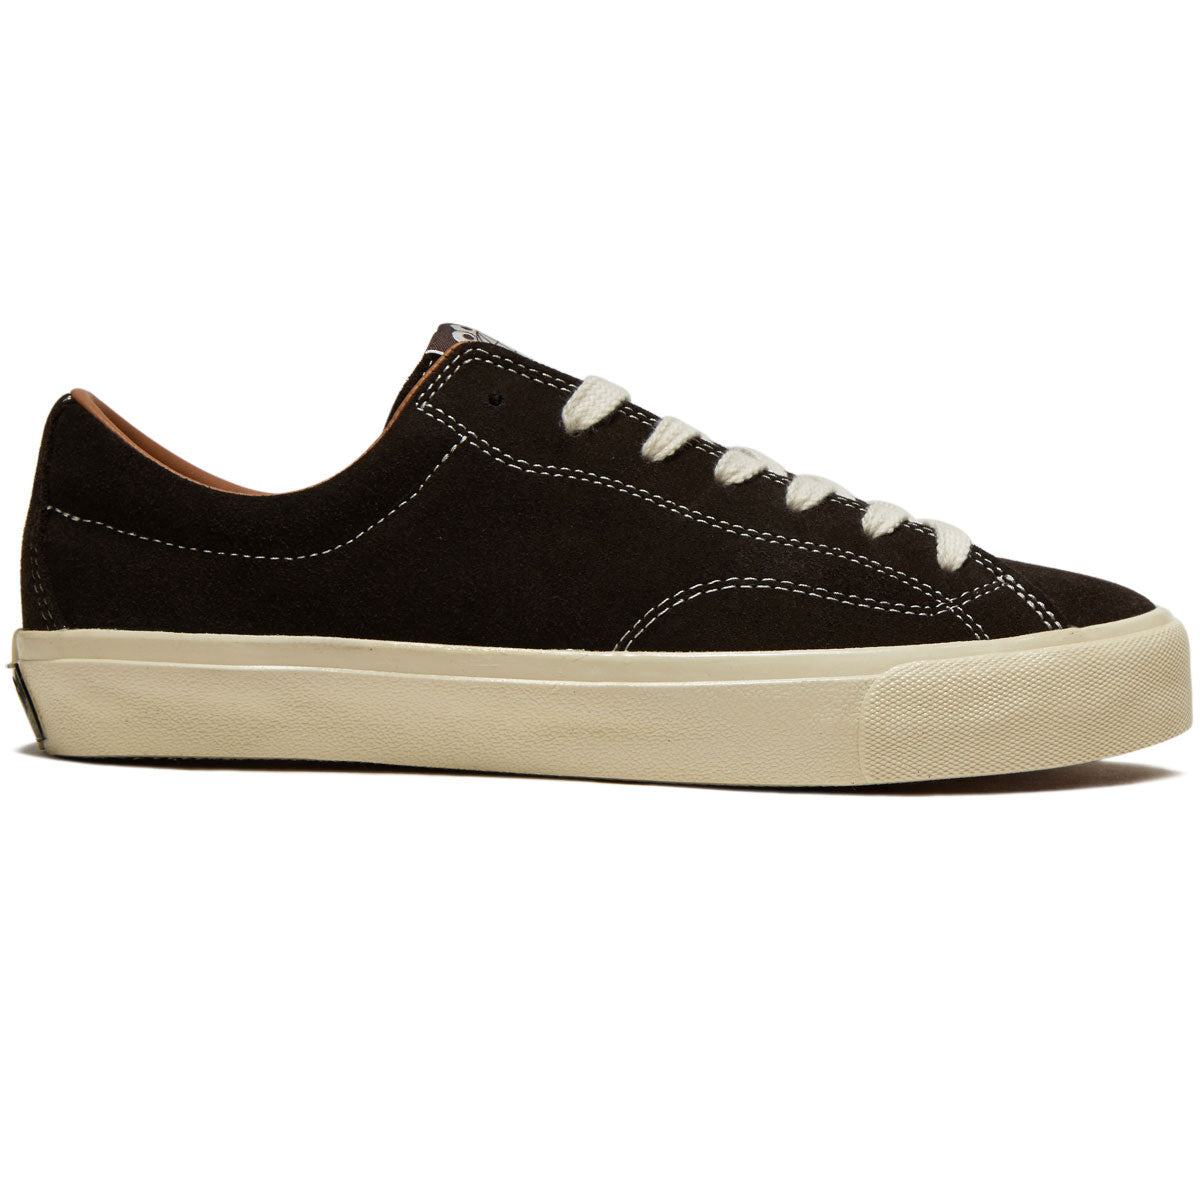 Last Resort AB VM003 Lo Suede Shoes - Coffee Bean/White image 1